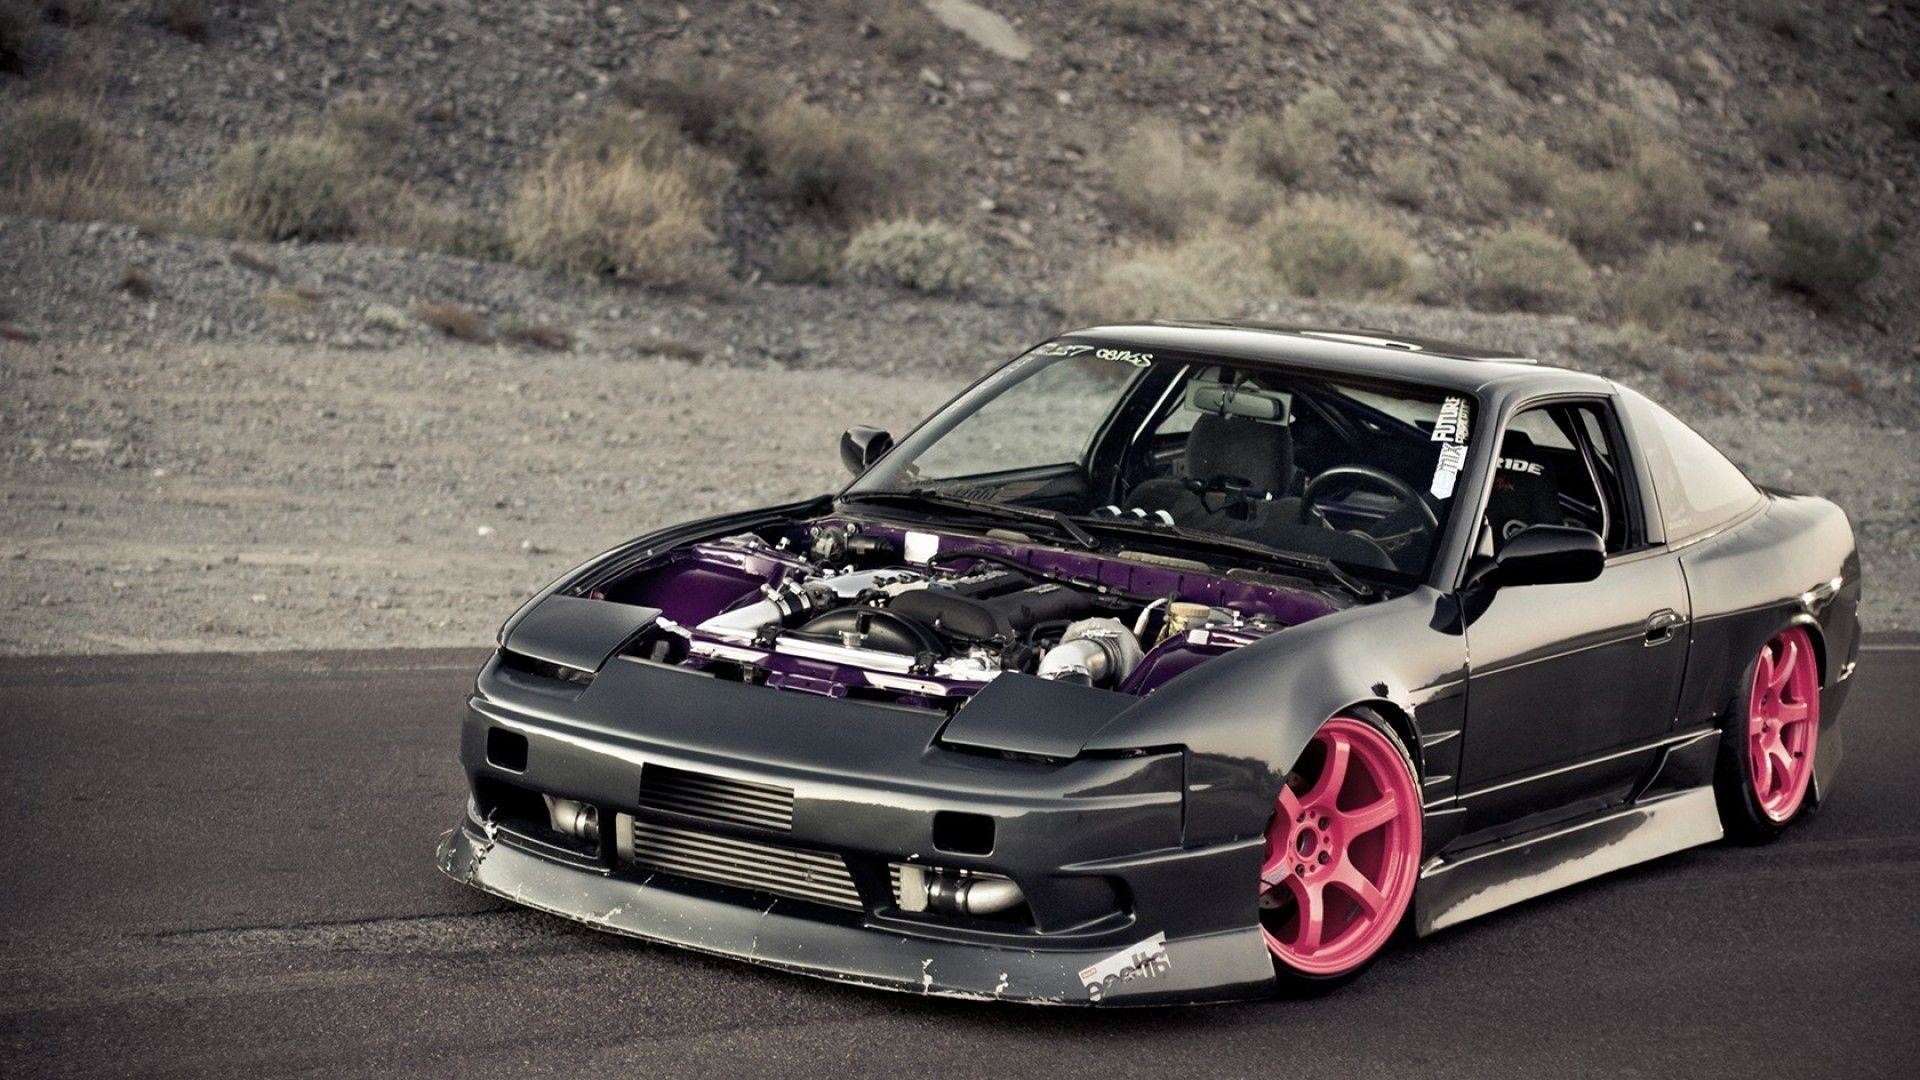 1920x1080 Popular Nissan 240SX Wallpapers - All cars wallpapers